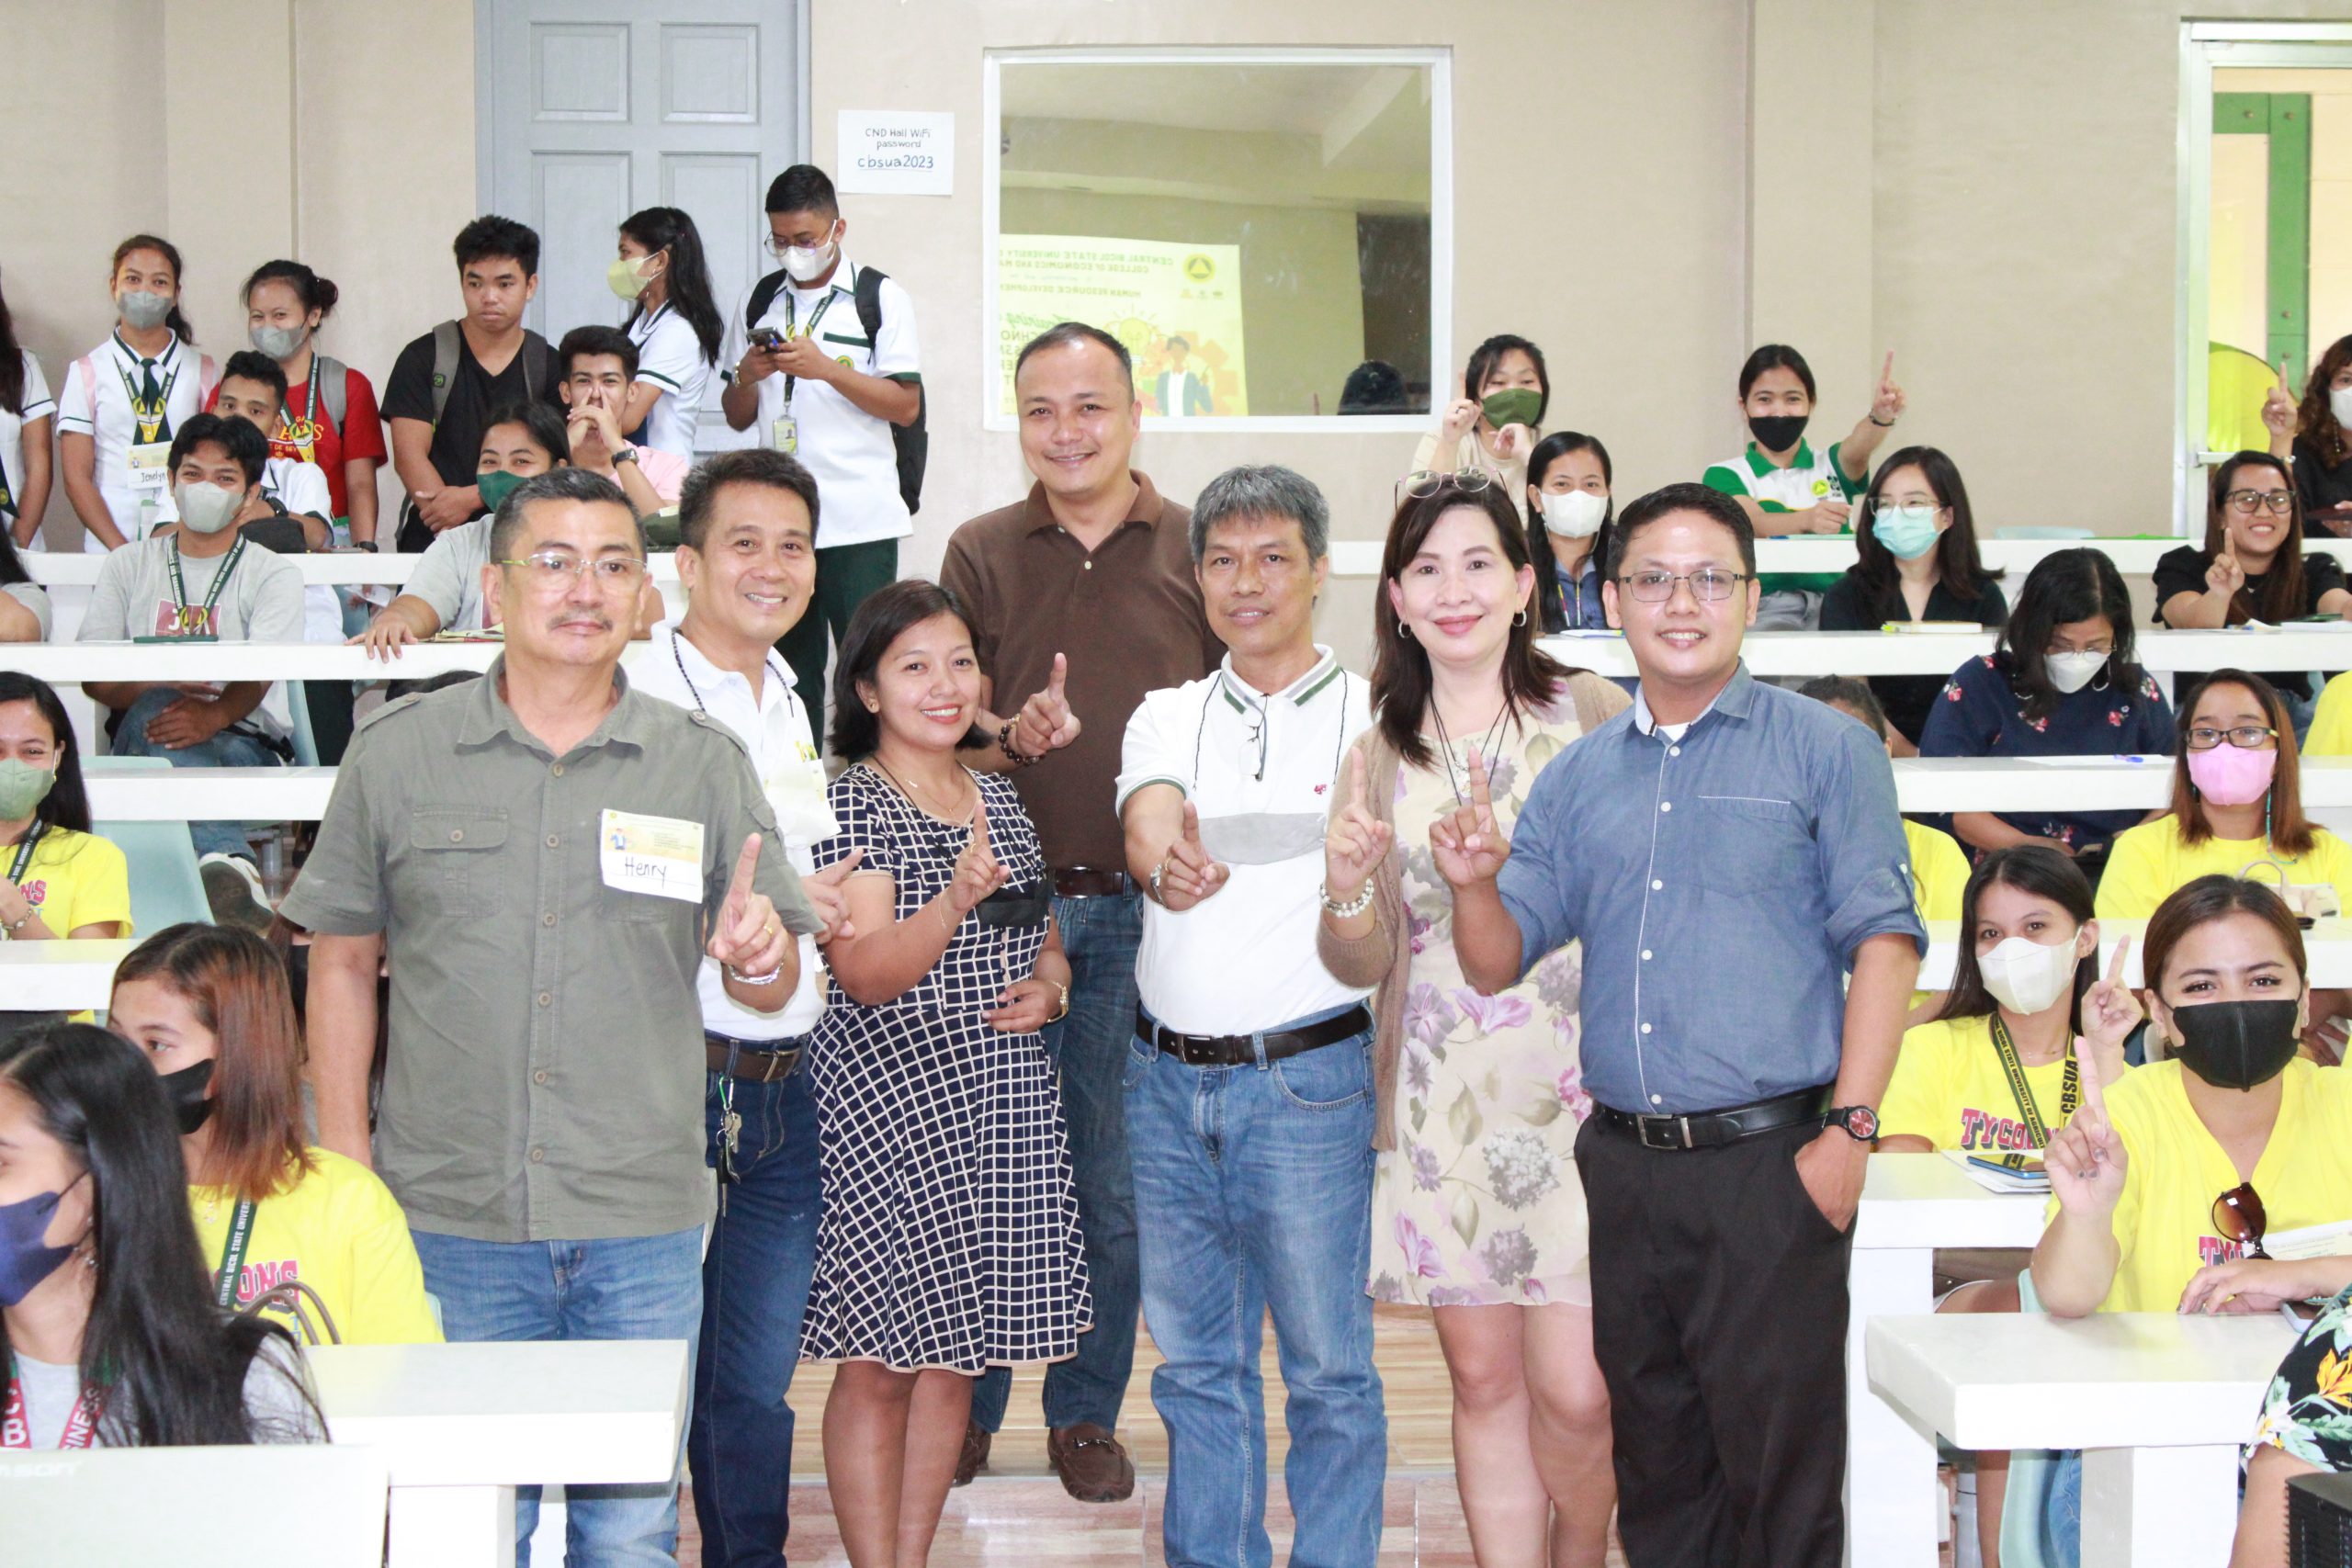 CEM, HRDO SPEARHEADS TRAINING ON TECHNOLOGY ASSESSMENT, COMMERCIALIZATION, PITCHING